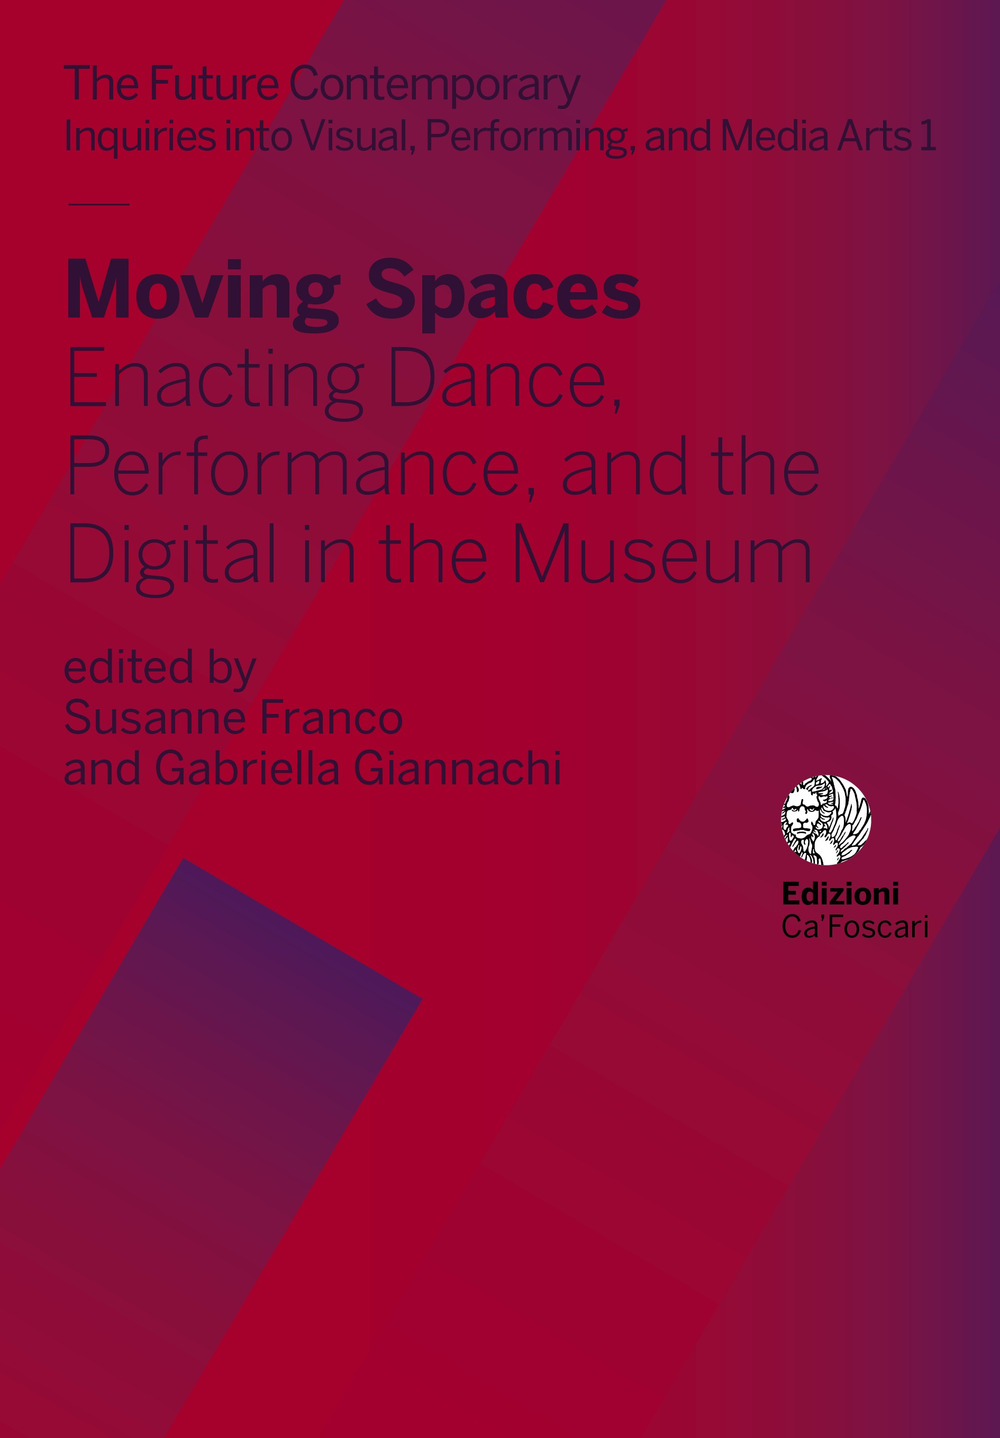 Moving spaces. Enacting dance, performance, and the digital in the museum